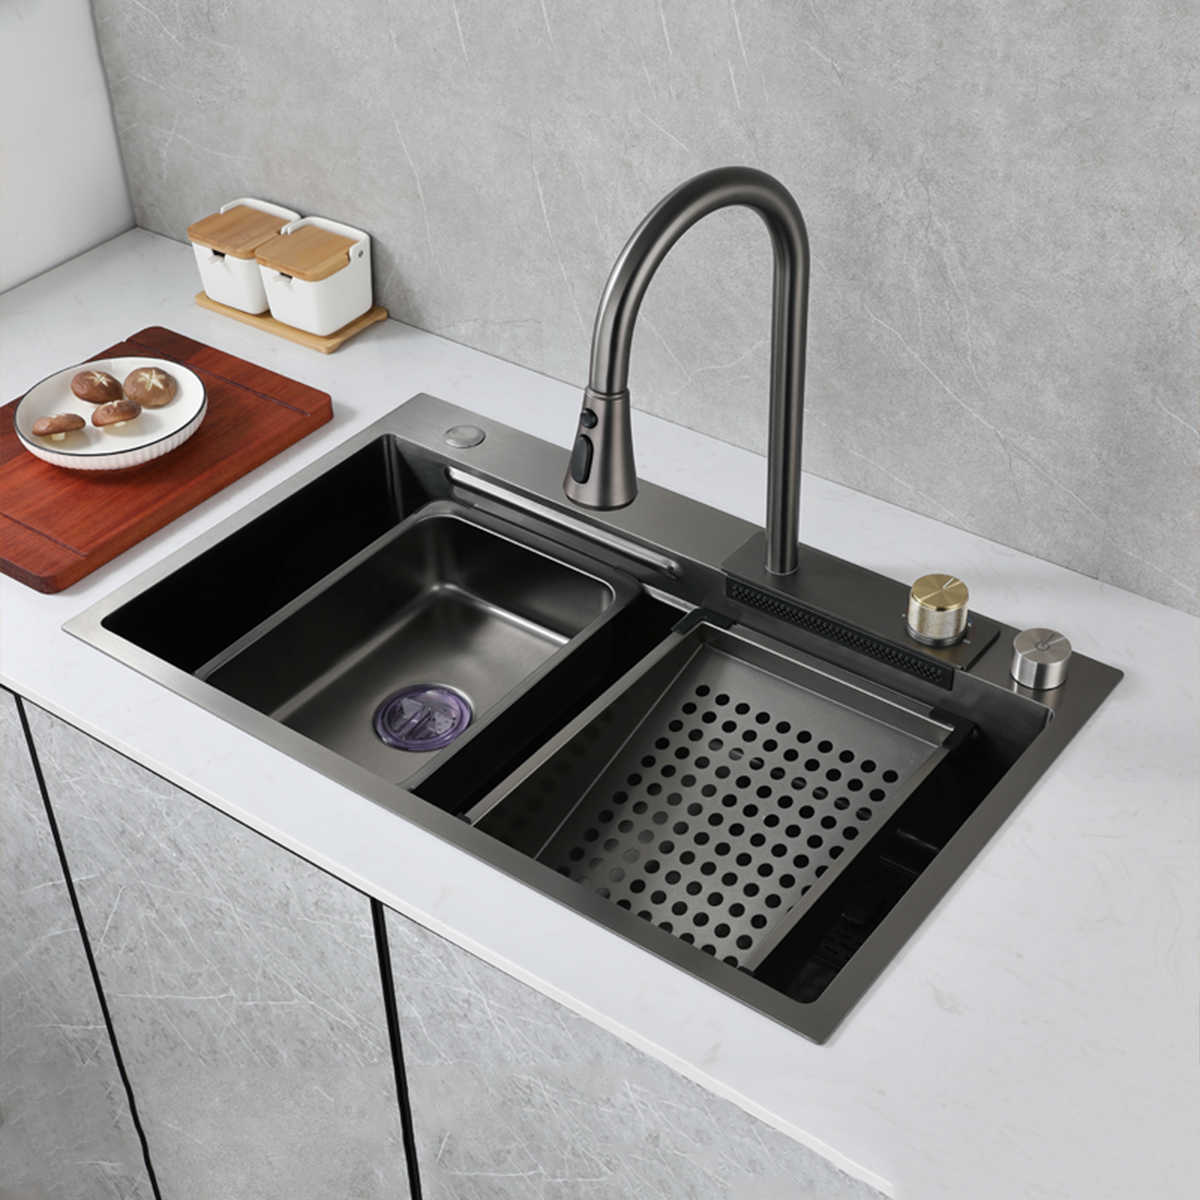 Aquacubic Design 31 inch Gunmetal Black 304 Stainless Steel Handmade Kitchen Workstation Sink with waterfall facet and accessories